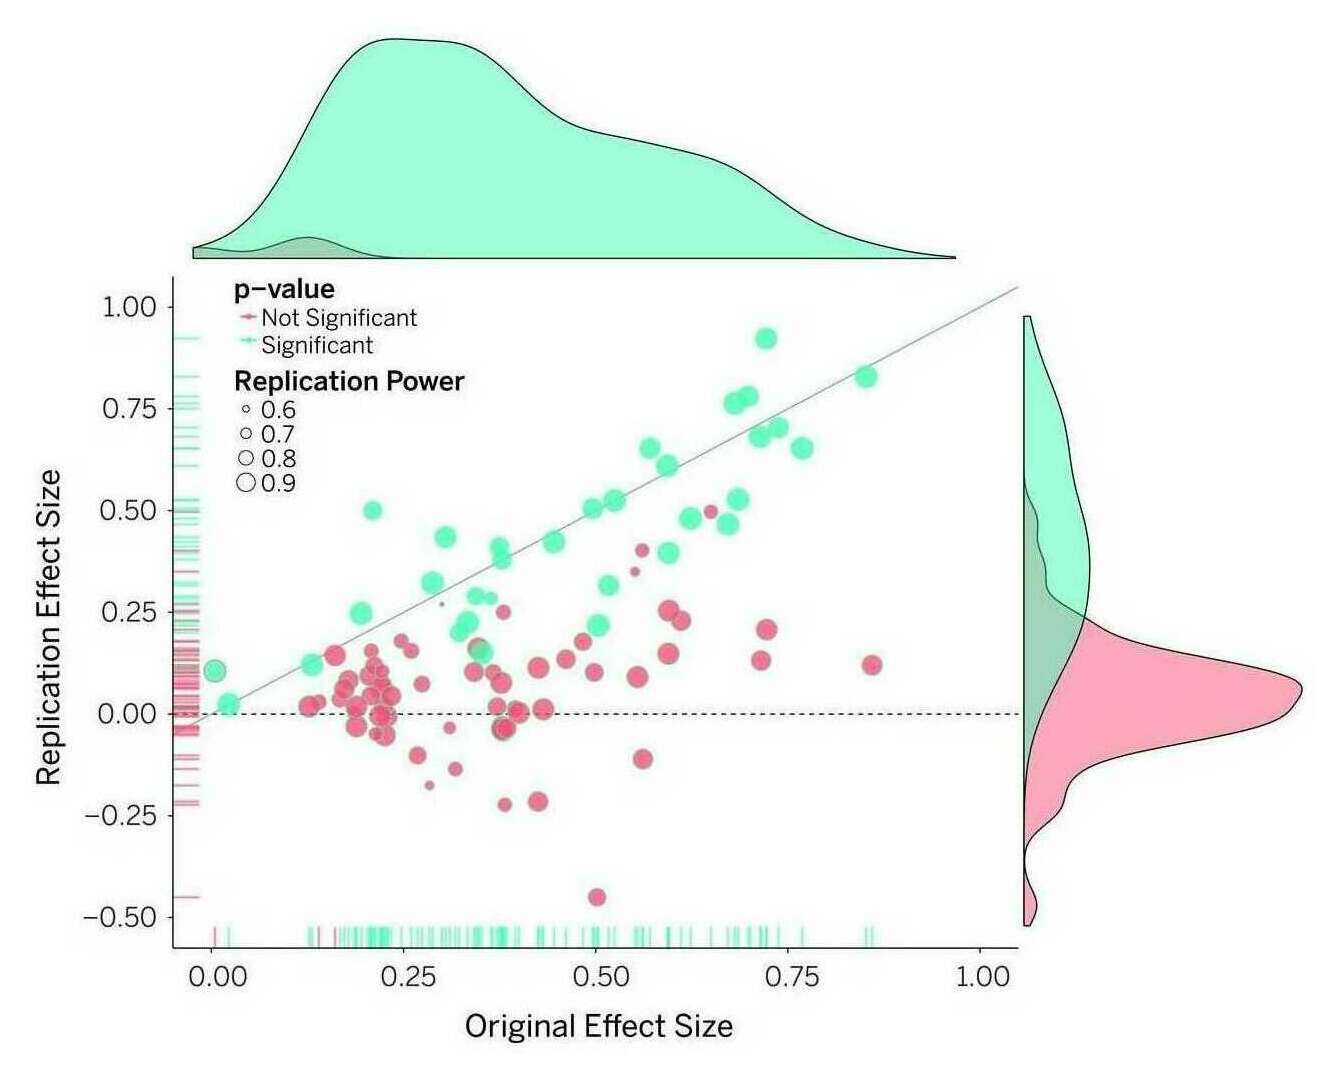 Open Science Collaboration 2015: “Figure 1: Original study effect size versus replication effect size (correlation coefficients). Diagonal line represents replication effect size equal to original effect size. Dotted line represents replication effect size of 0. Points below the dotted line were effects in the opposite direction of the original. Density plots are separated by statistically-significant (blue) and nonsignificant (red) effects.”